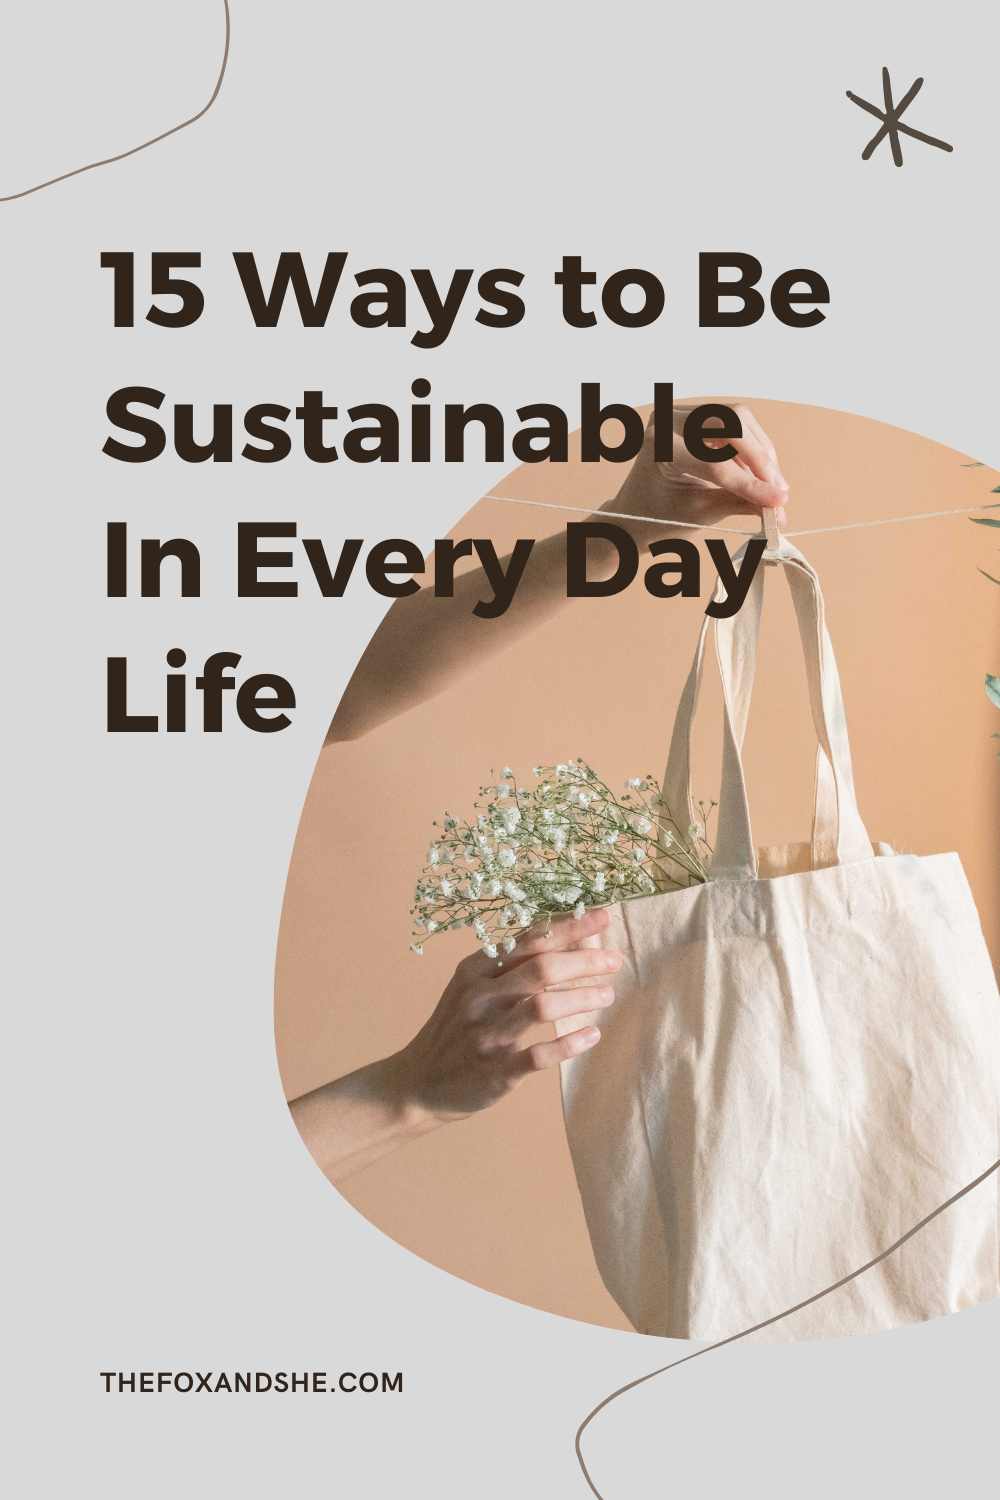 15 Ways to Be More Sustainable in your Everyday Life | TheFoxandshe.com